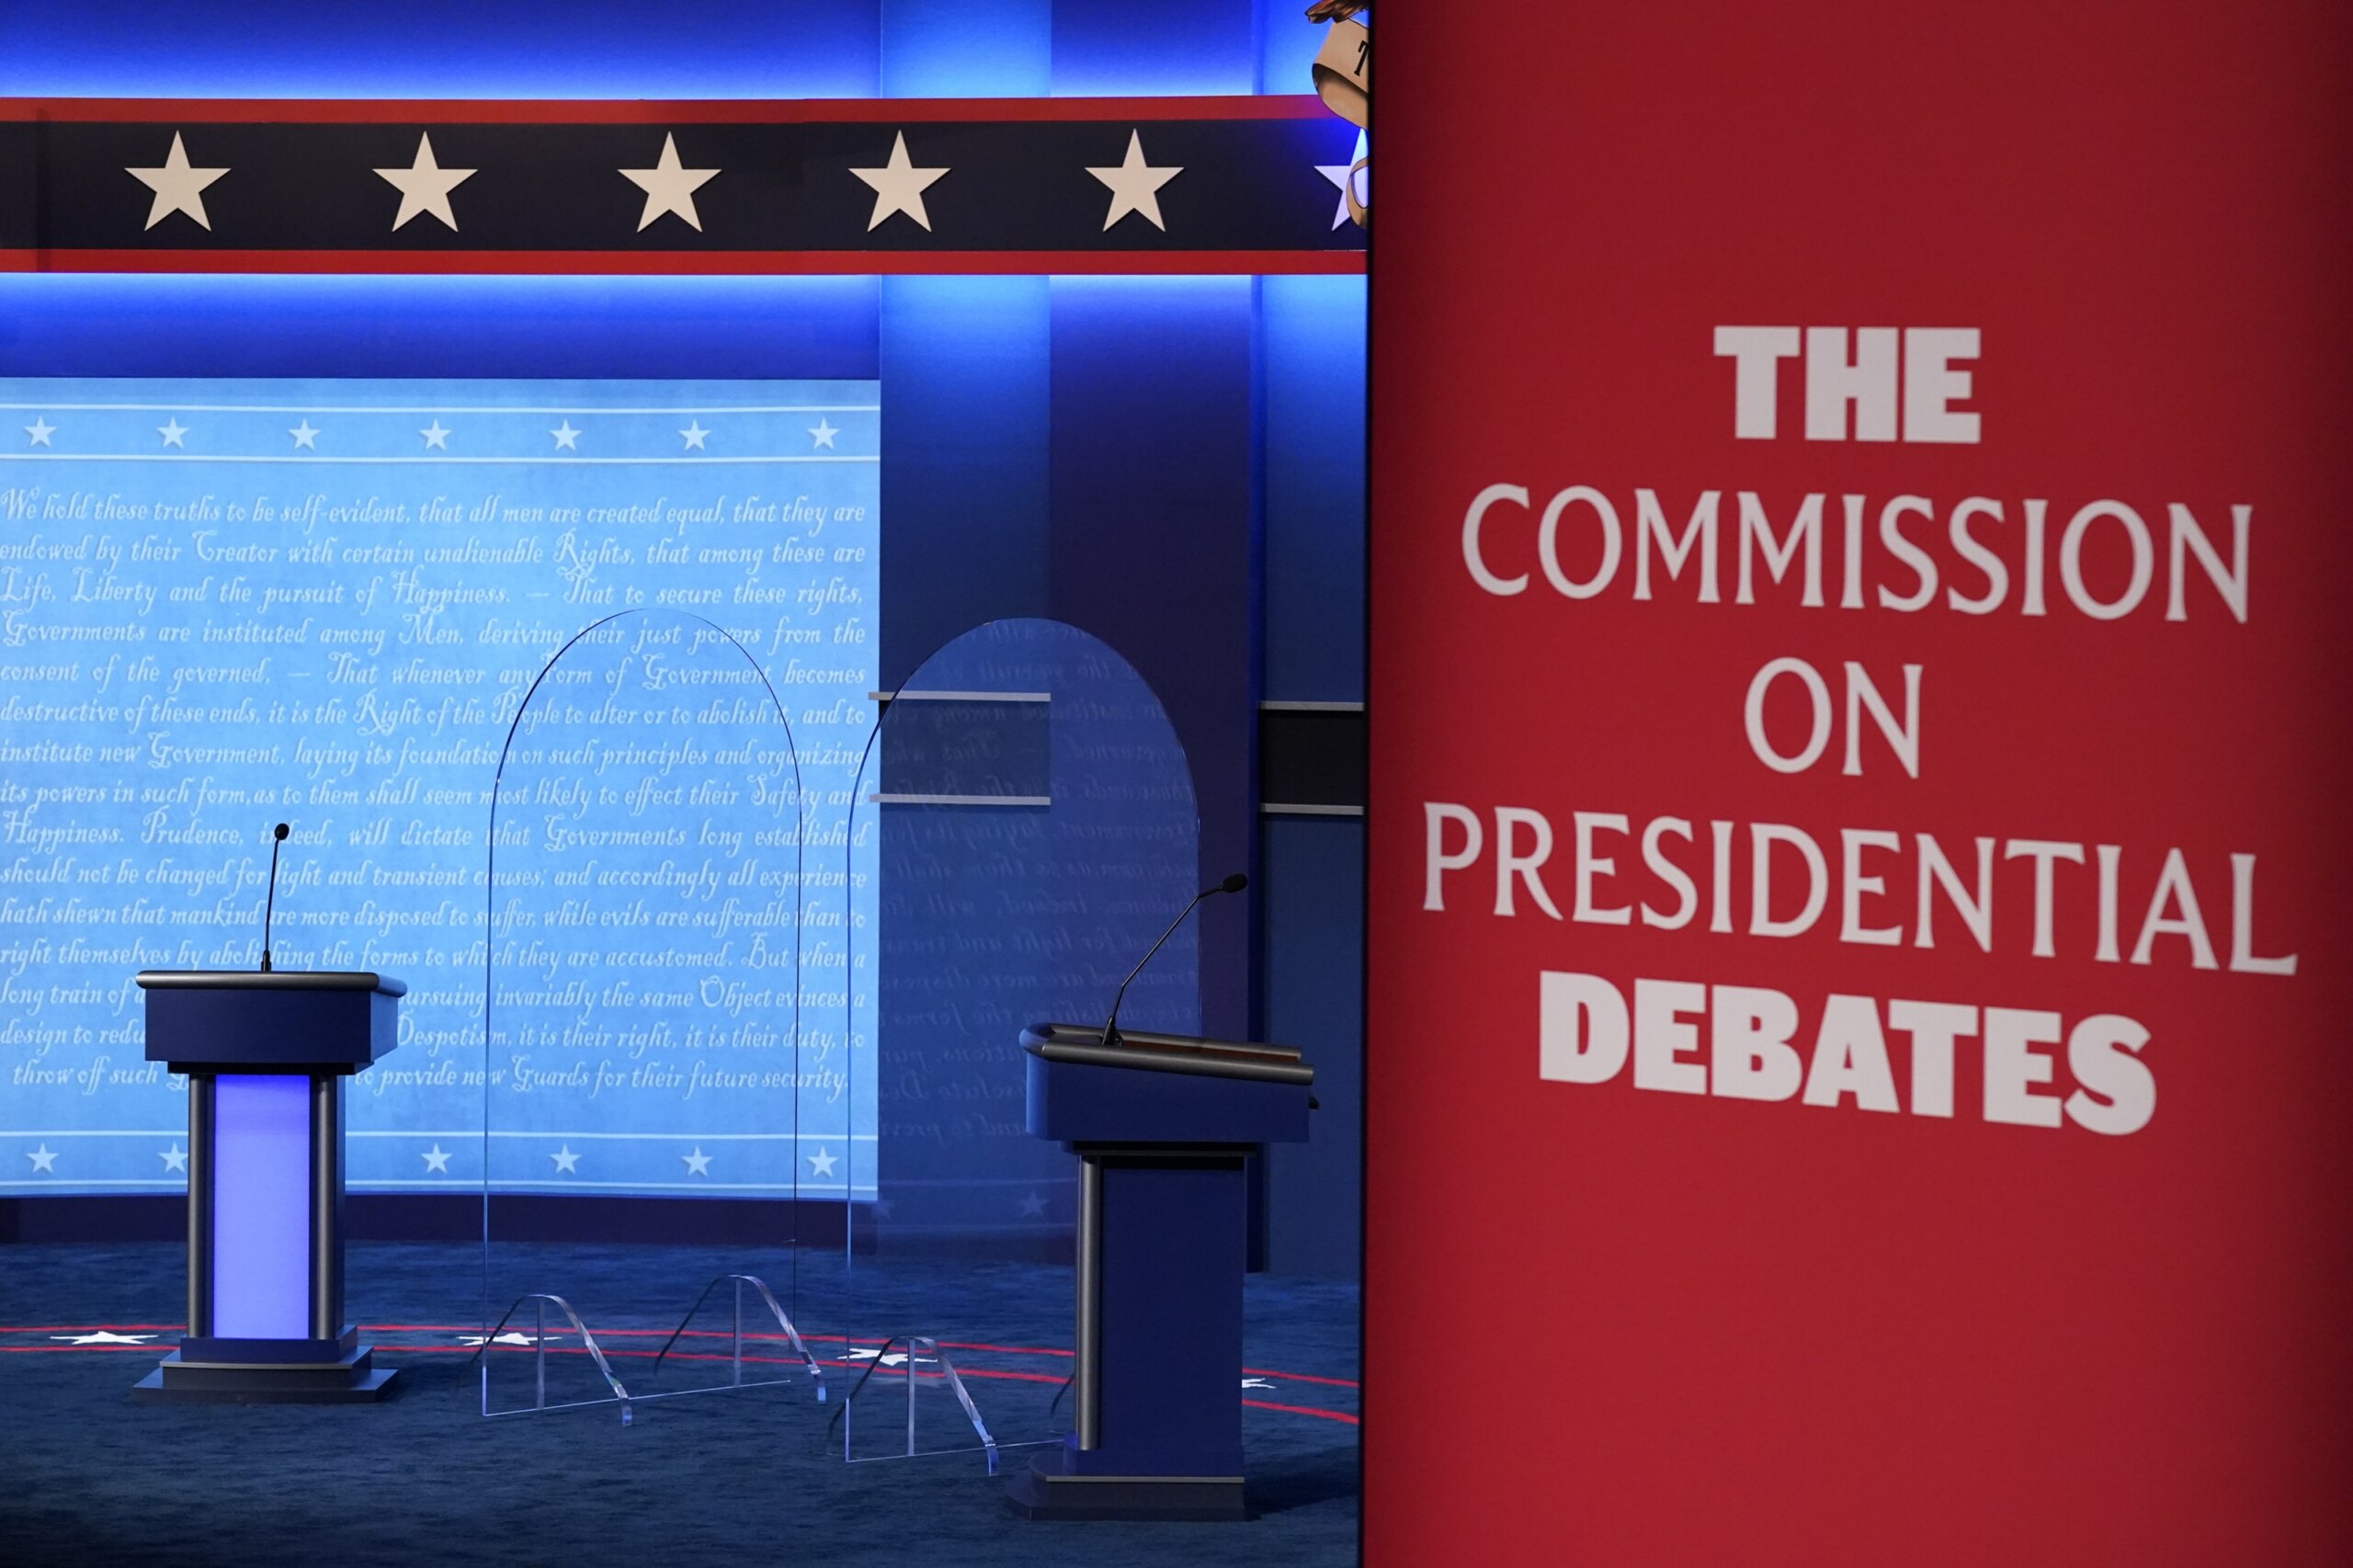 Four Republicans will be on stage for the fourth presidential debate